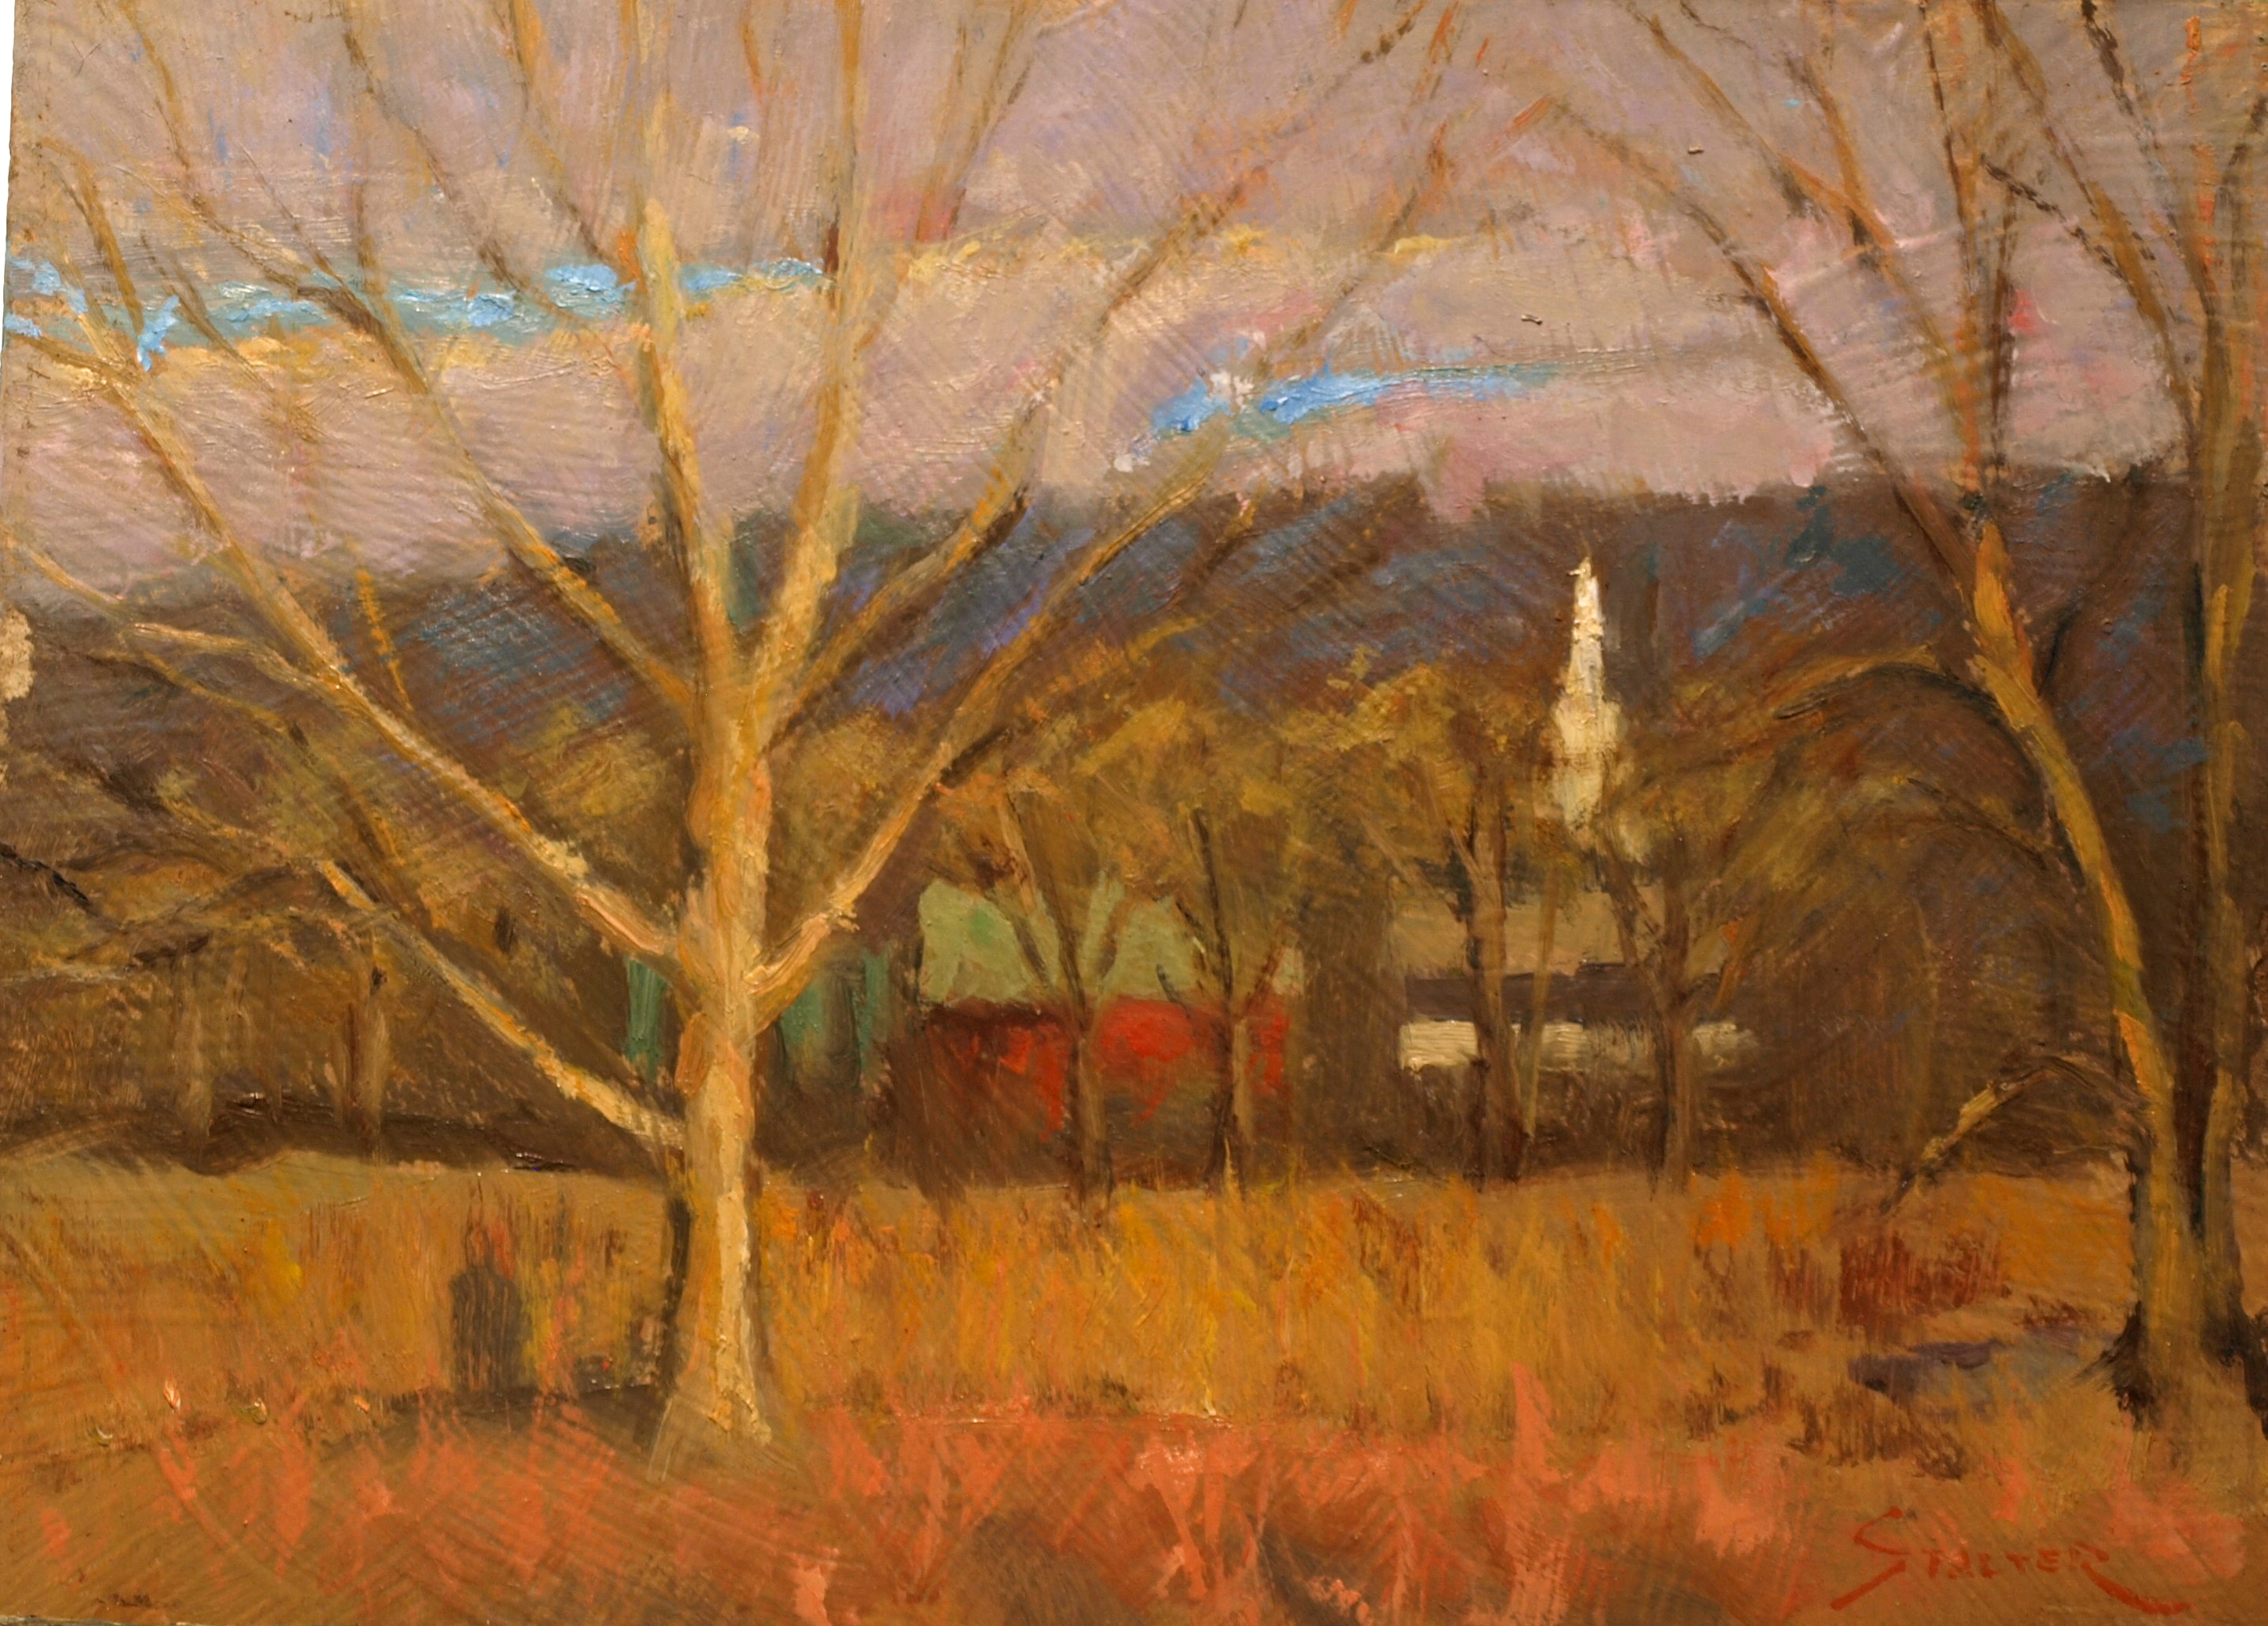 Late Autumn in Gaylordsville, Oil on Canvas on Panel, 9 x 12 Inches, by Richard Stalter, $220